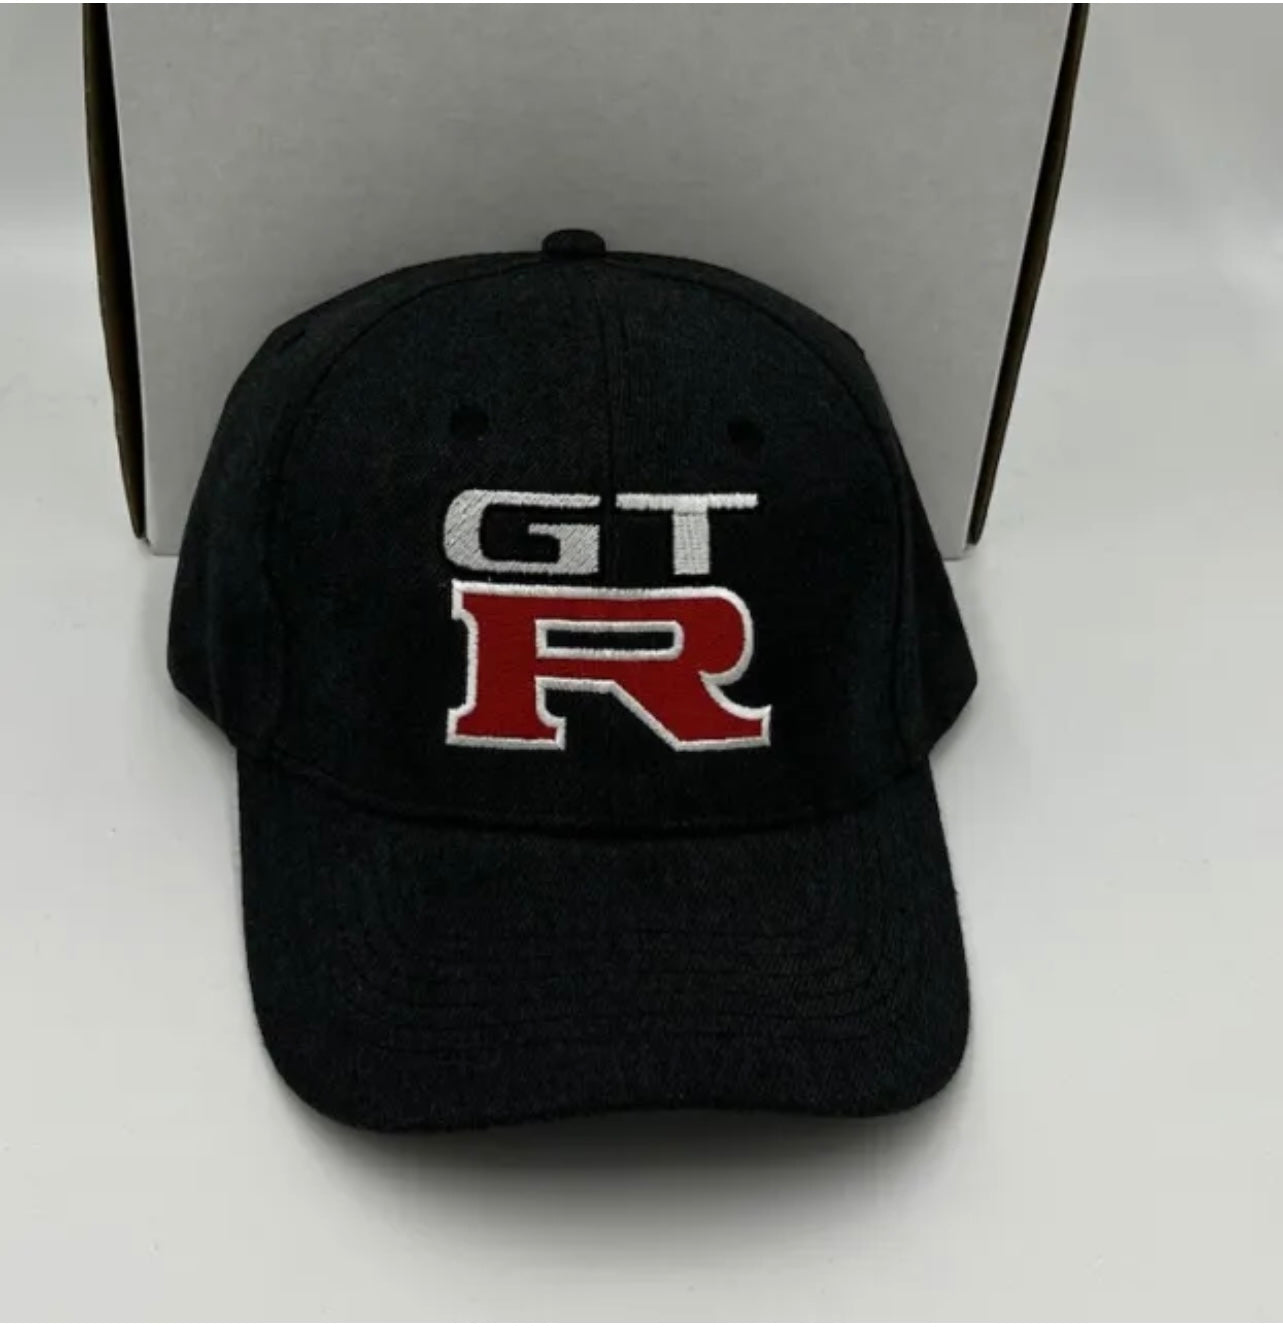 GT-R Embroidered Hat